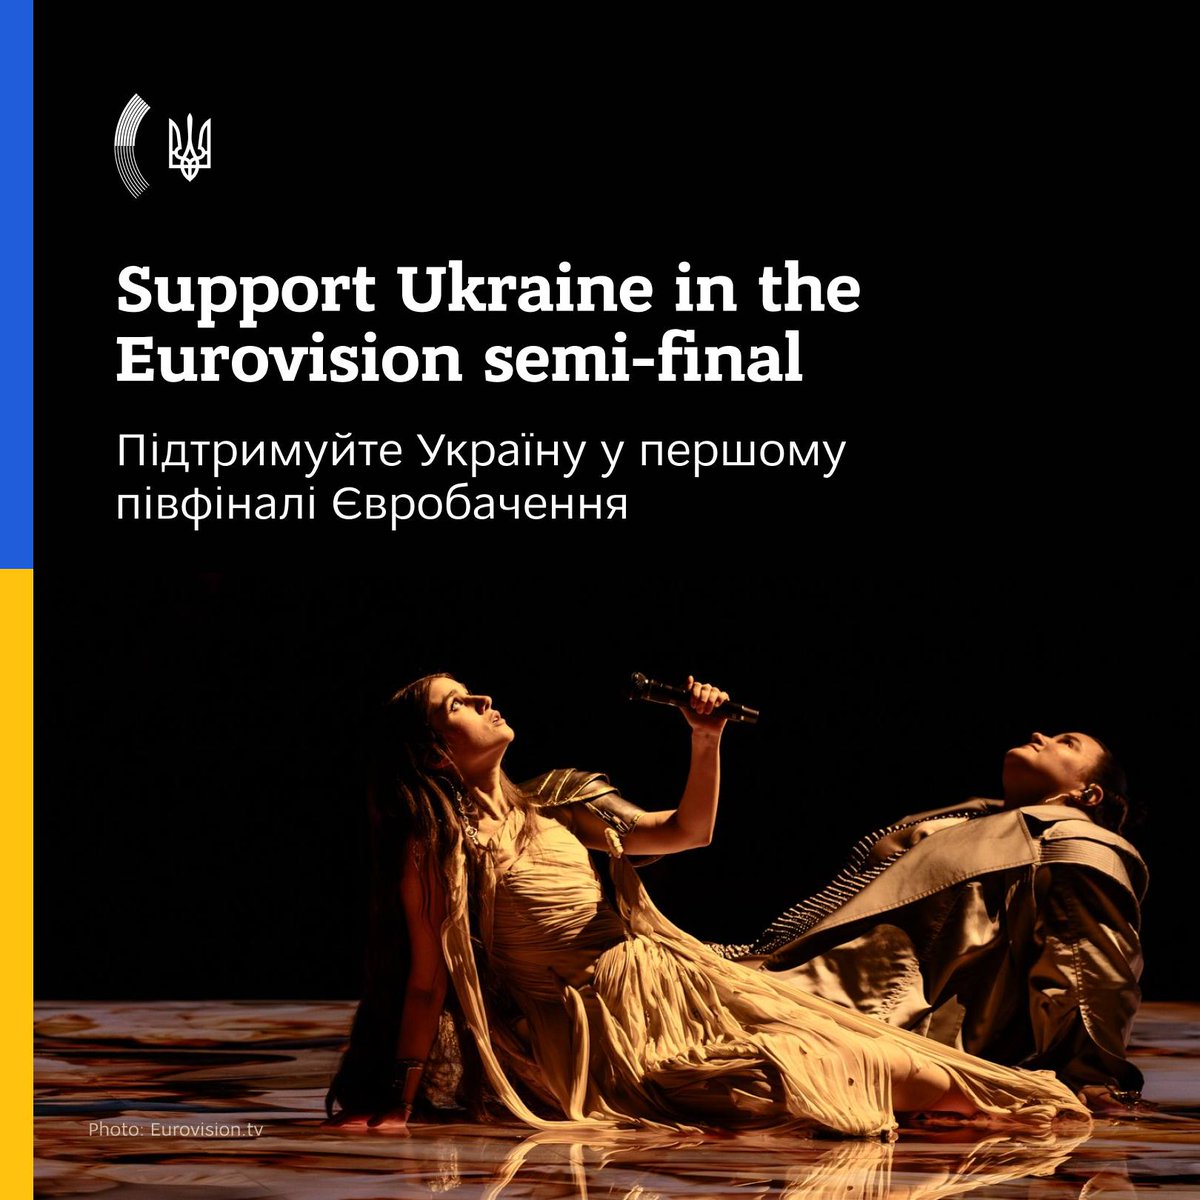 Support Ukraine in the first #Eurovision semi-final on May 7, to start at 21:00 CET. We`ll perform as number 5 with one of the most popular songs among this year's participants. Voting will open after the performance of the last song!